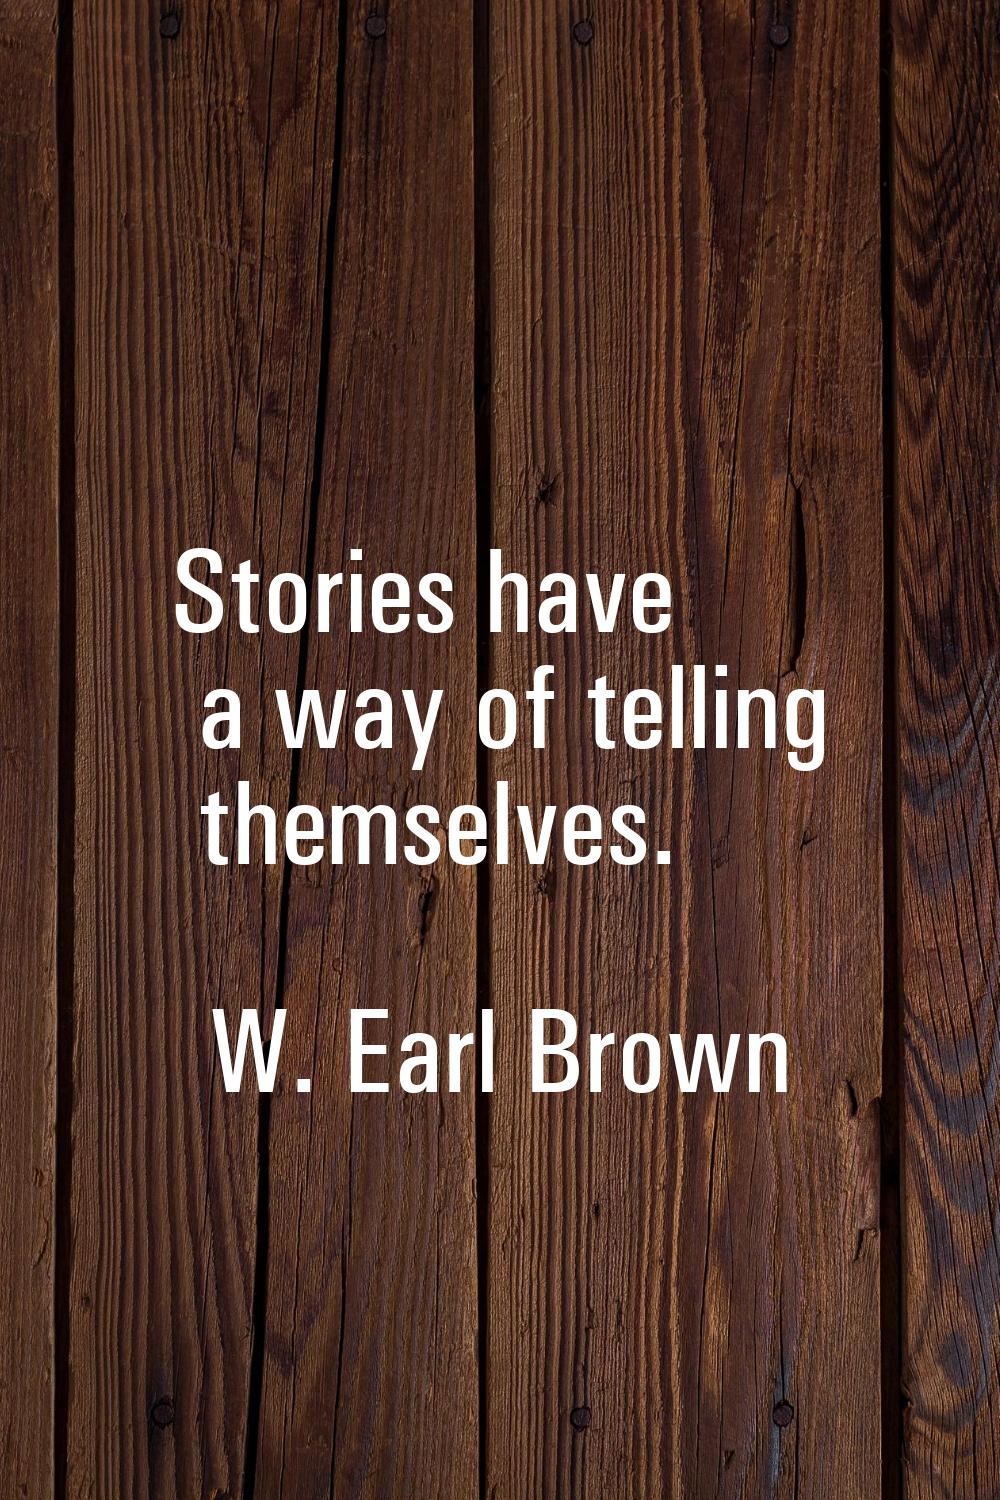 Stories have a way of telling themselves.